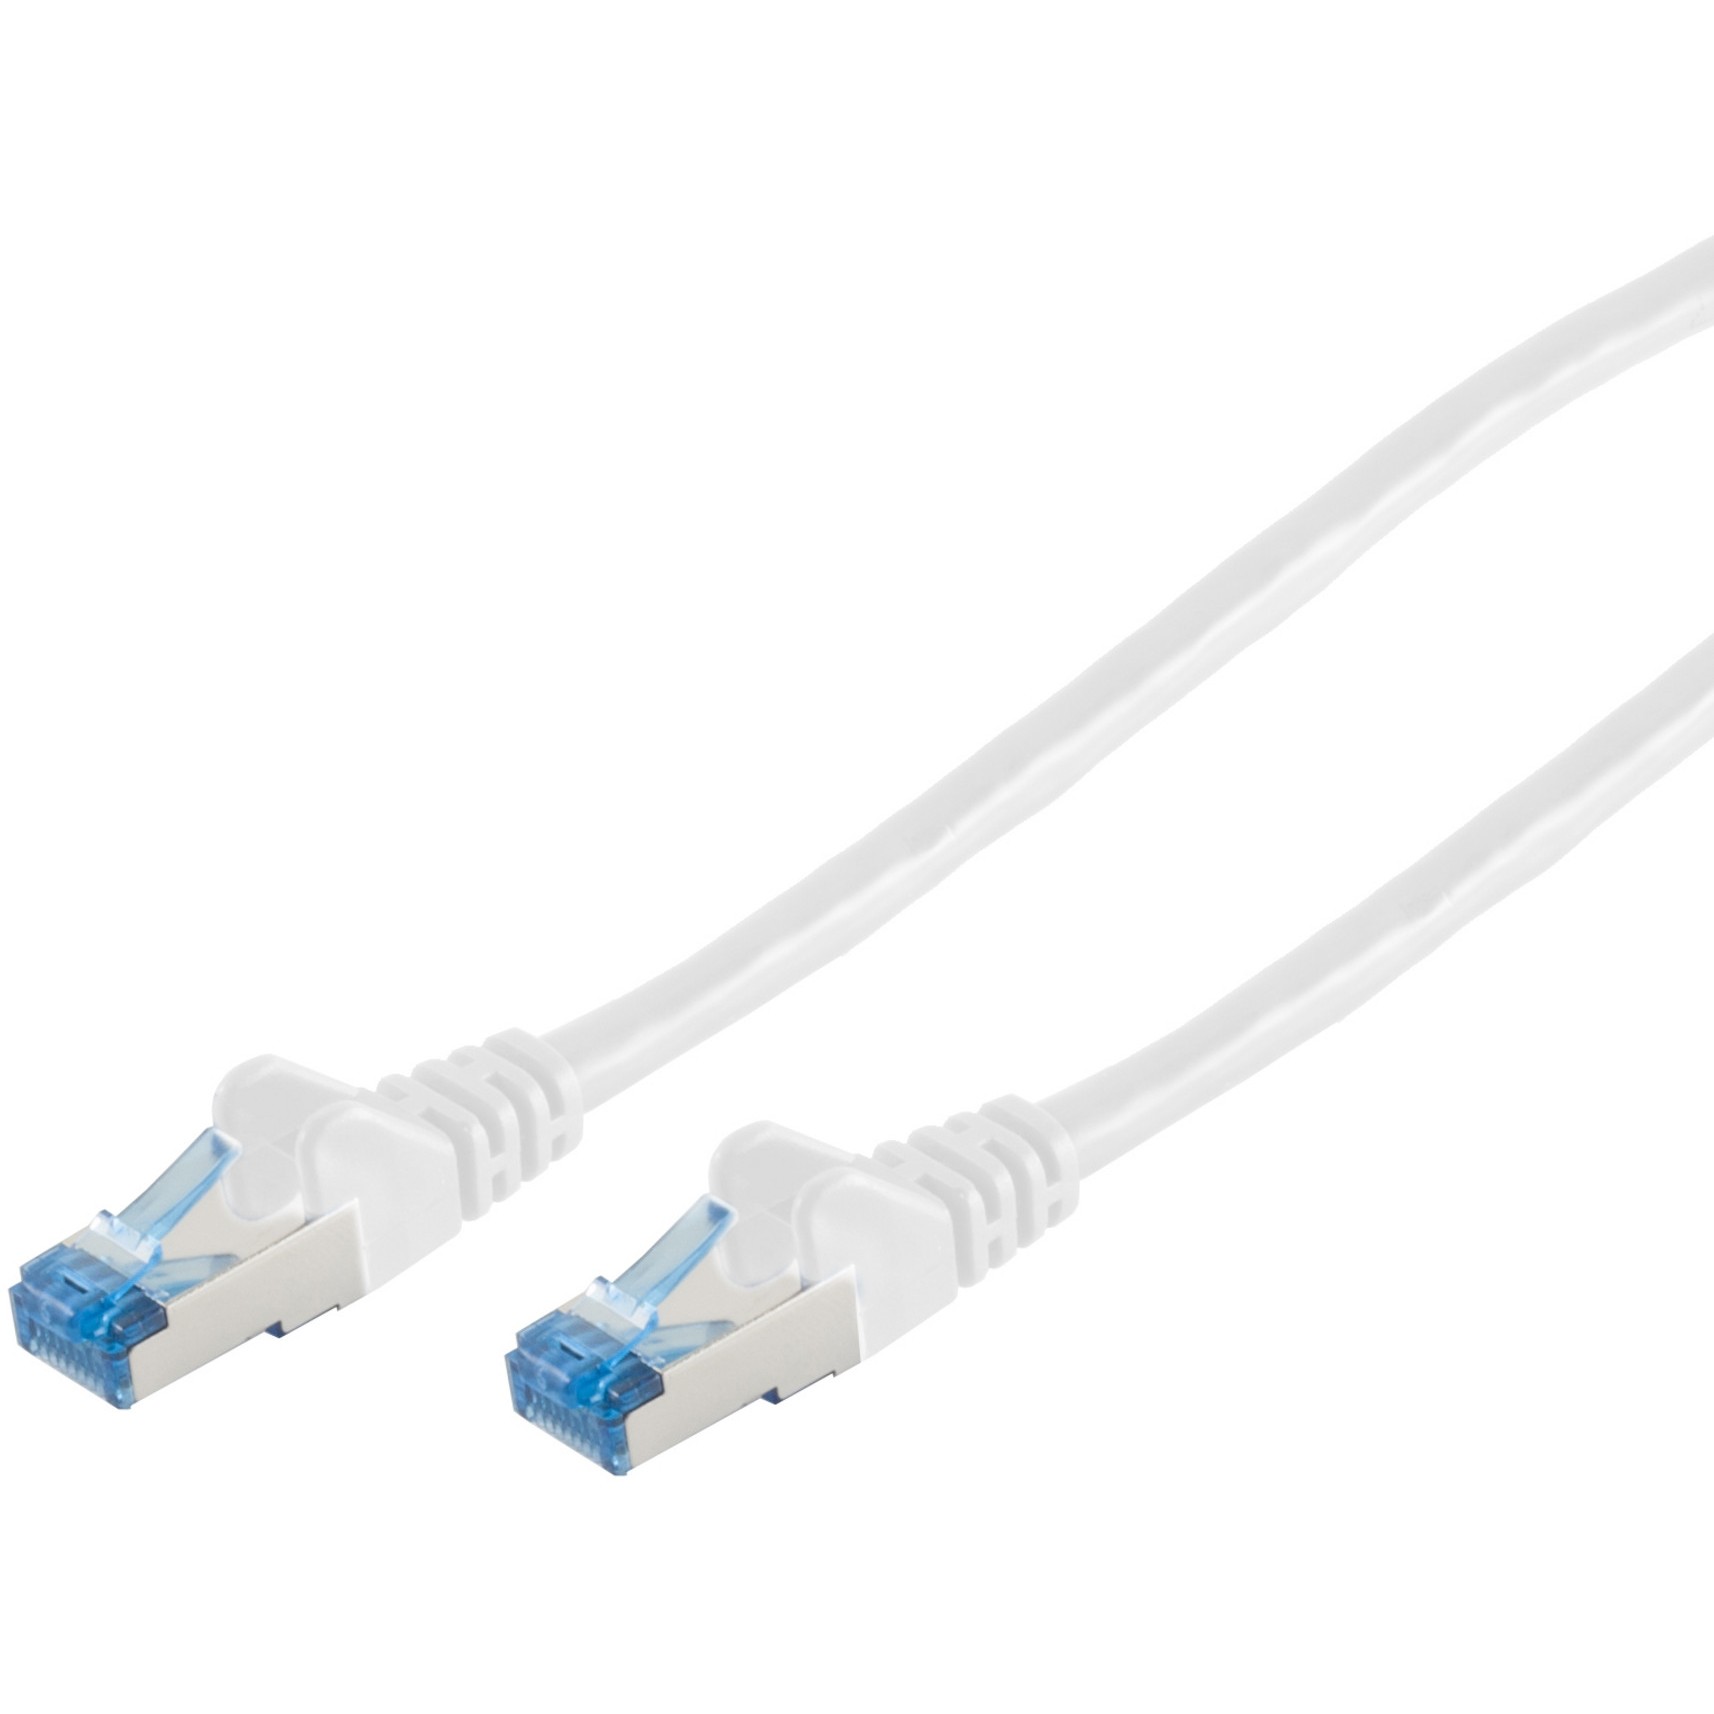 S-Conn 75712-W networking cable